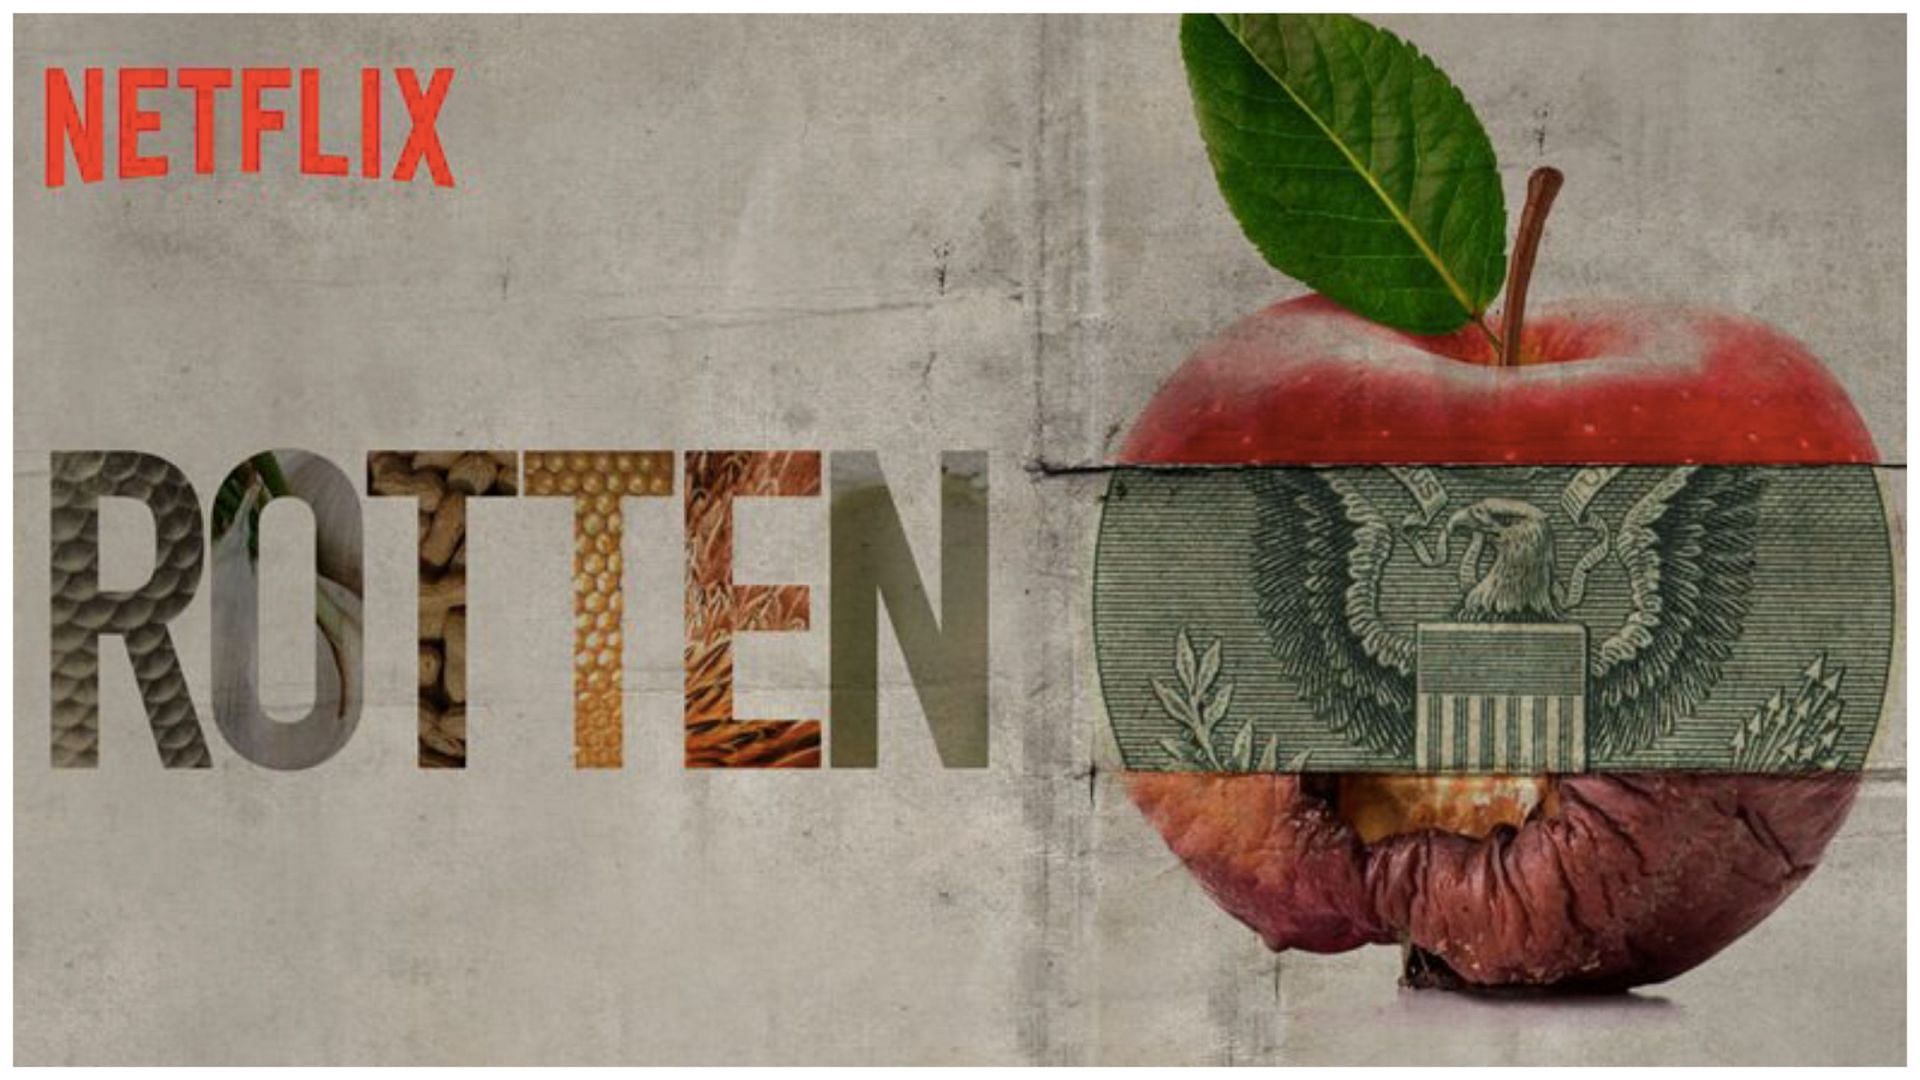 Talks about different american food practices (Image via Netflix)